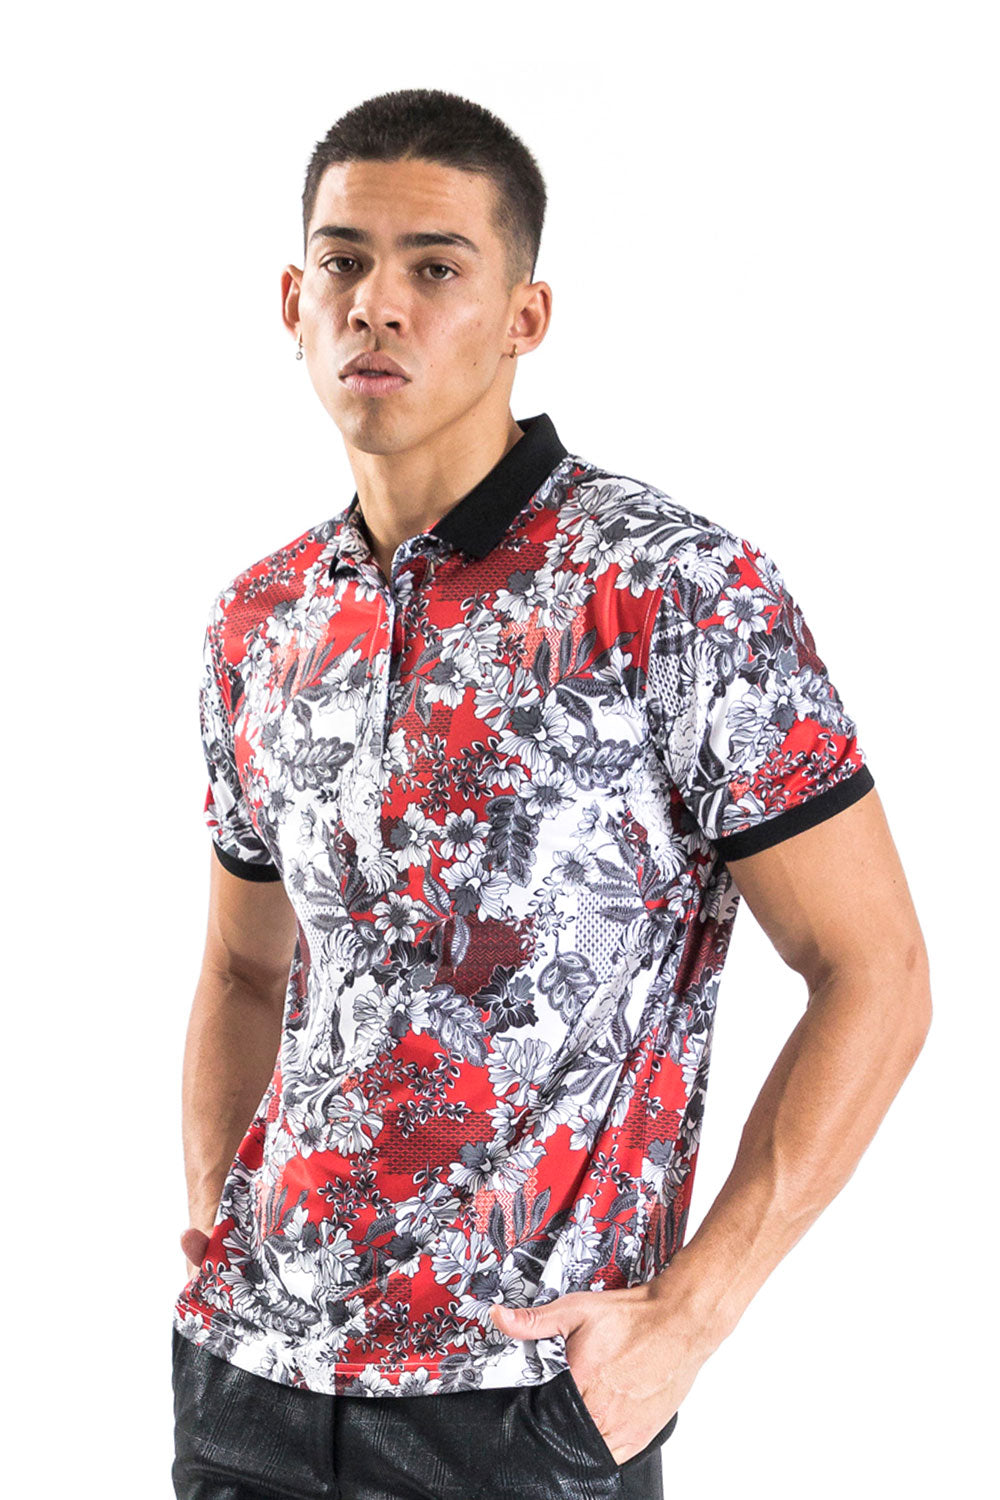 BARABAS men's floral printed red white polo Shirts LP118 